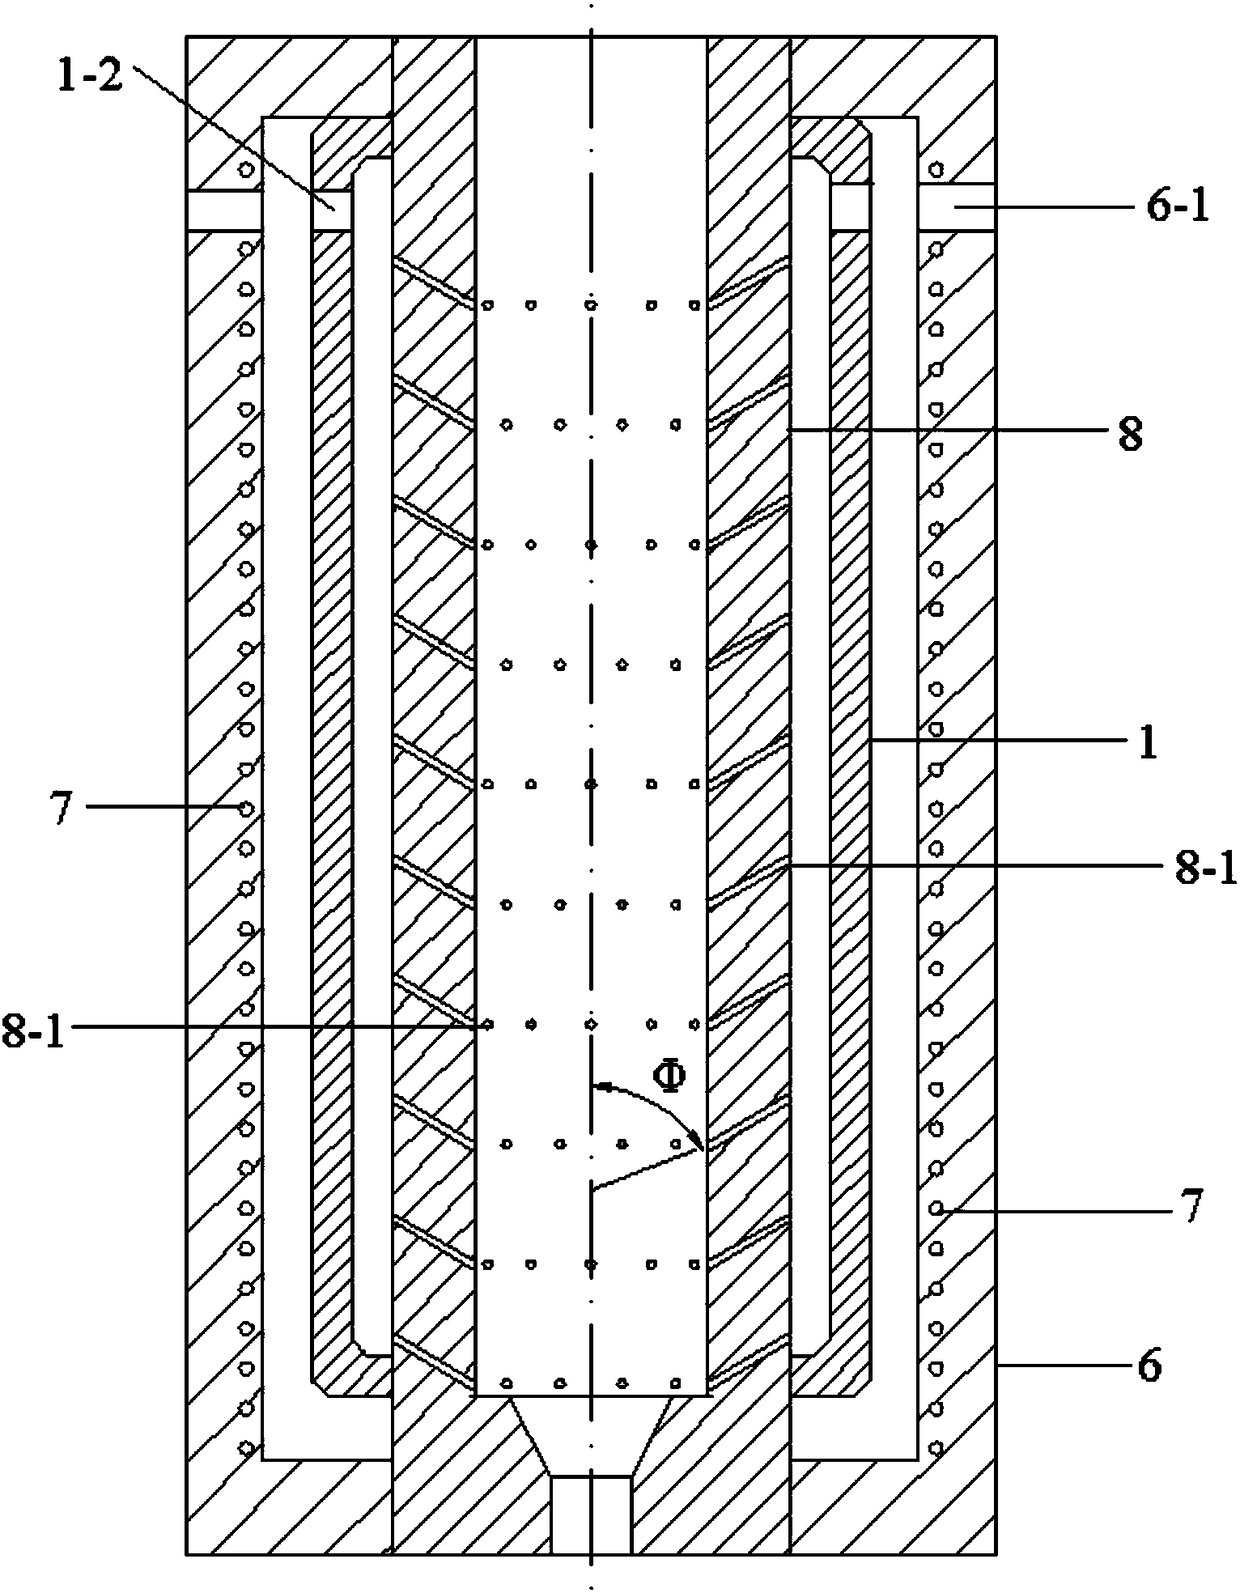 Continuous-lubrication extrusion mold